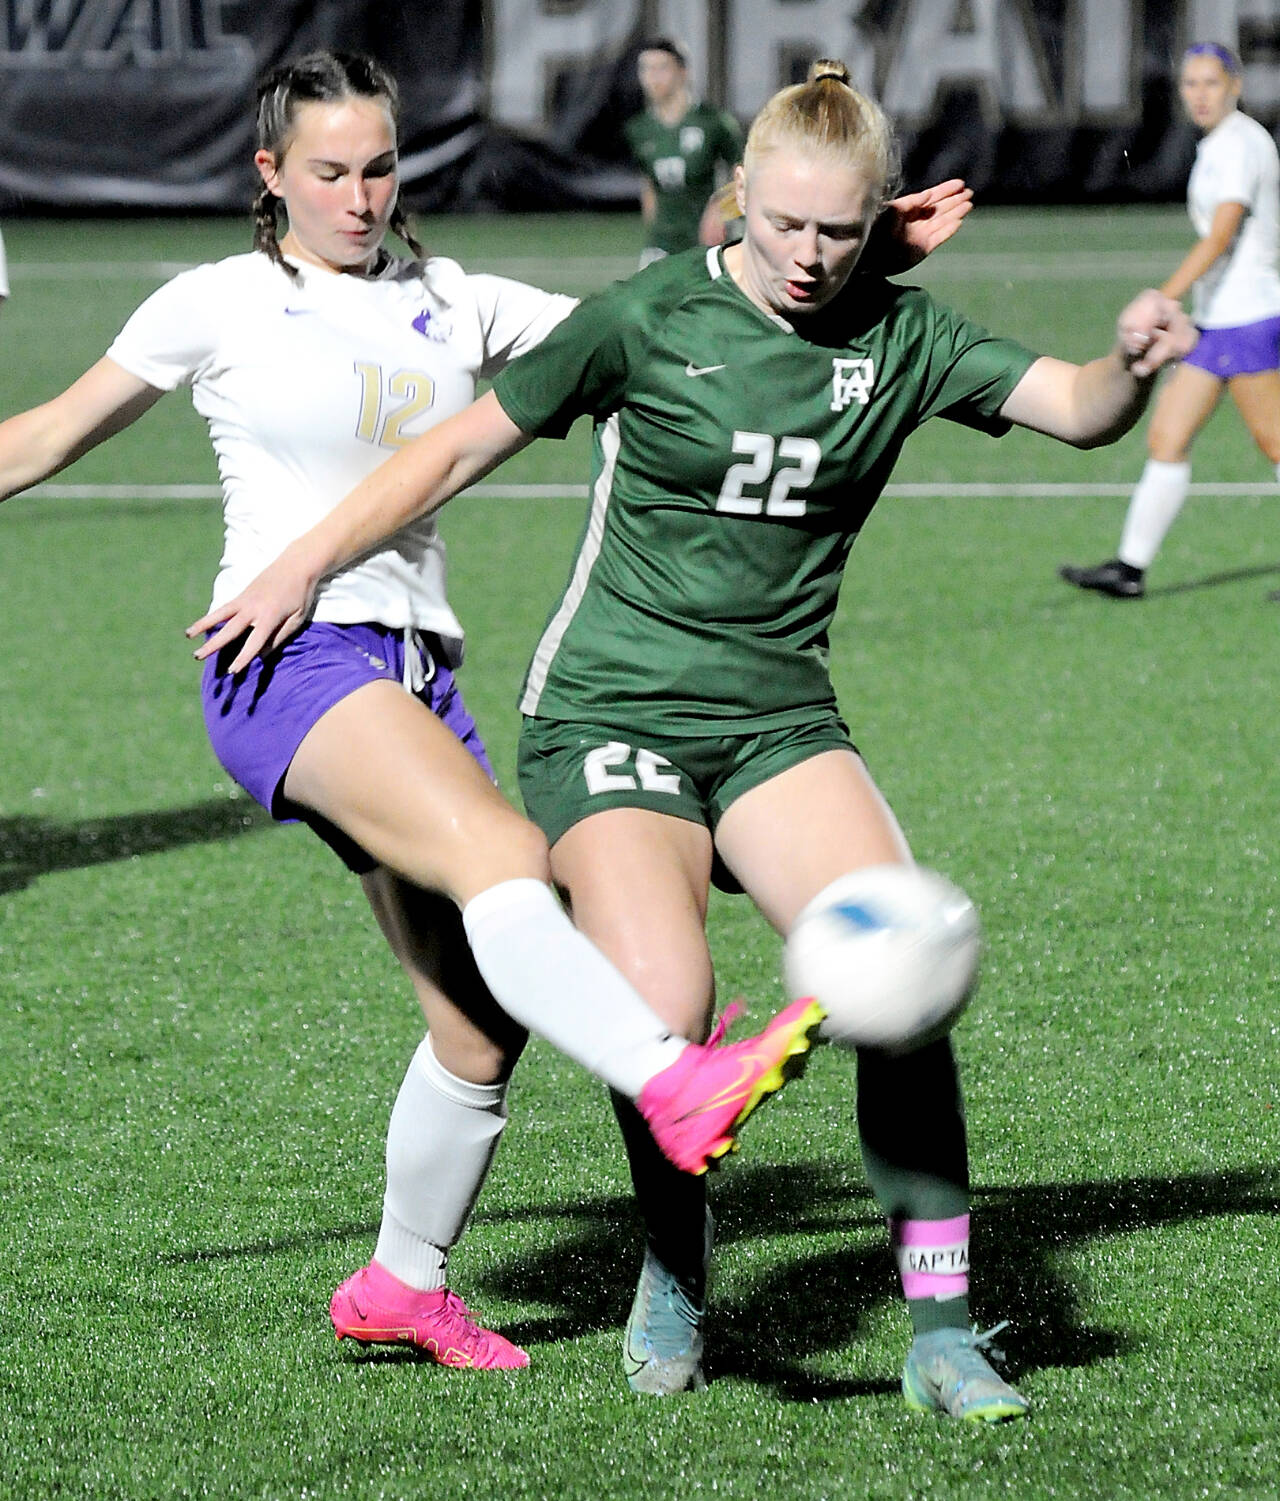 Sequim’s Olive Bridge, left, was named to the Olympic League second team for girls soccer, the only freshman to make either the first or second team. Port Angeles’ Paige Mason (22), who led the team with 12 goals, was named to the league’s first team. (Keith Thorpe/Peninsula Daily News)